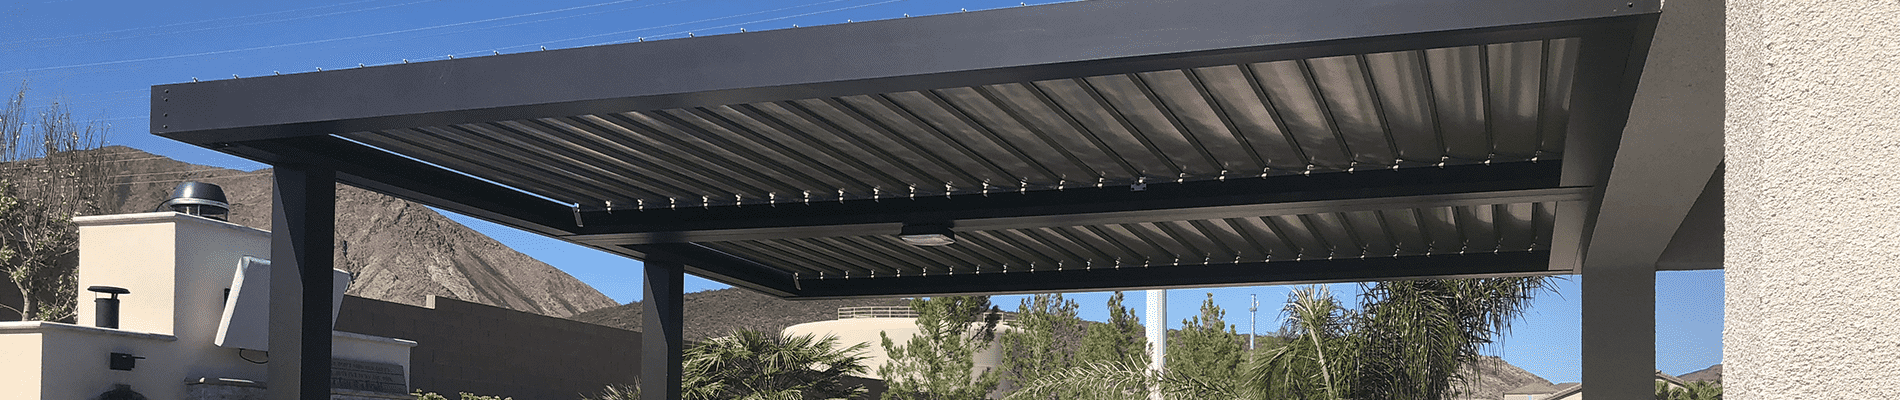 Adjustable Louvered Patio Covers North Las Vegas NV